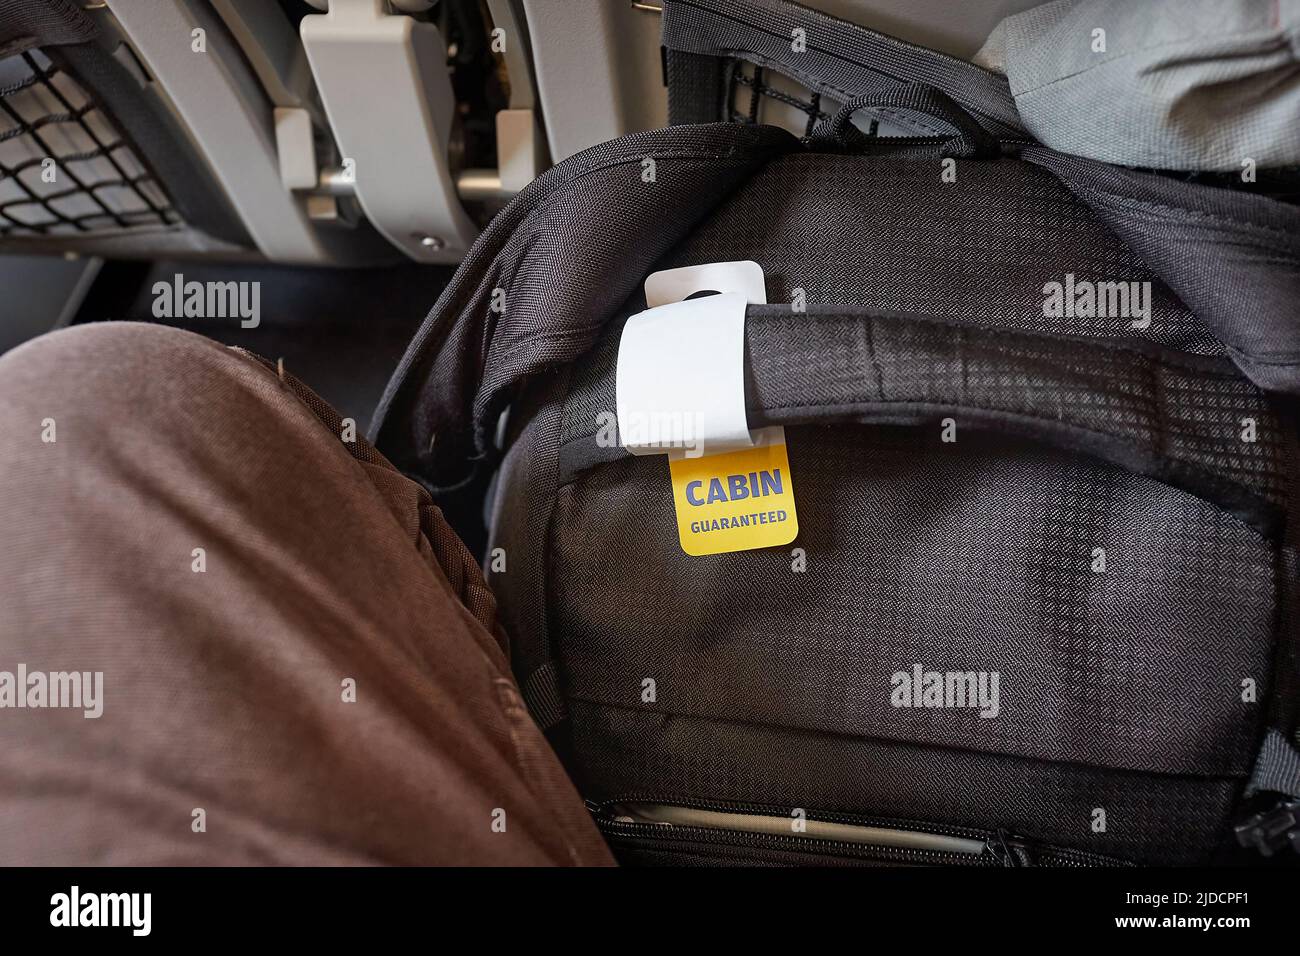 Cabin bag in front of seet on economy class flight Stock Photo